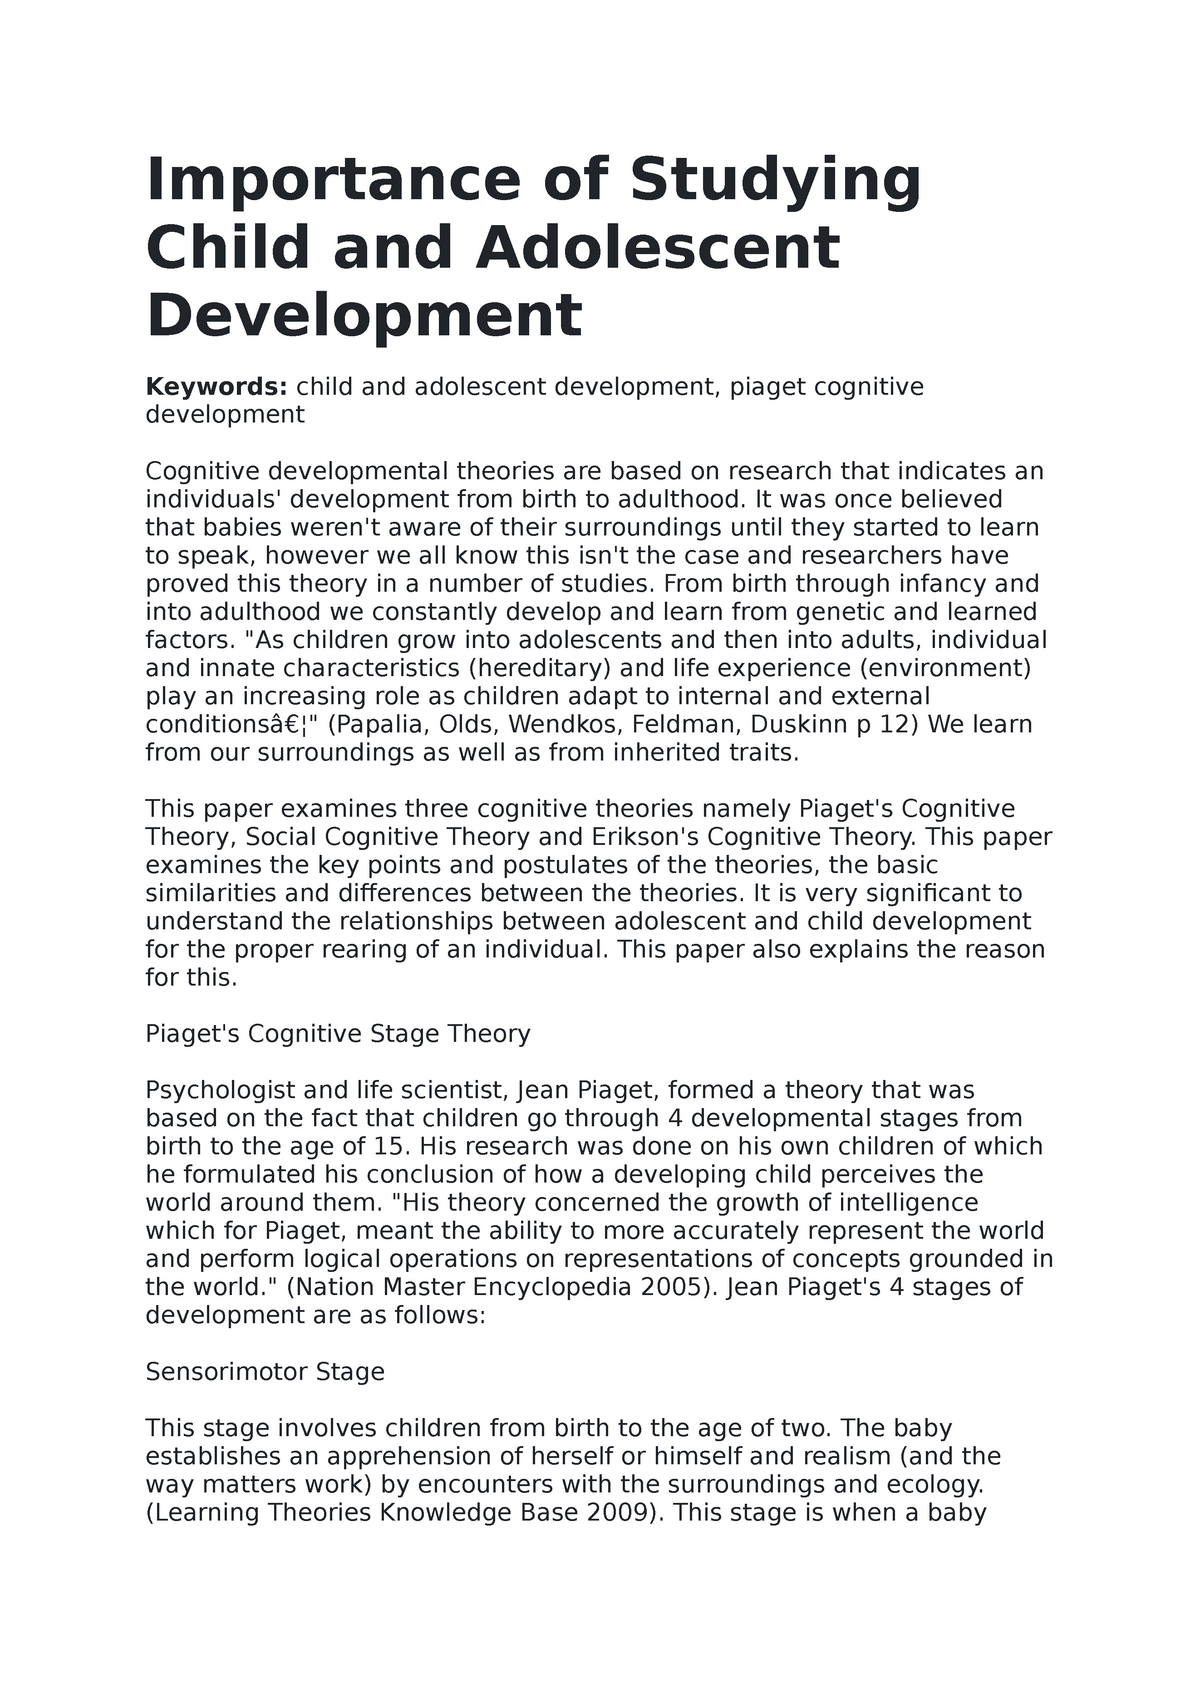 sample of case study in child and adolescent development